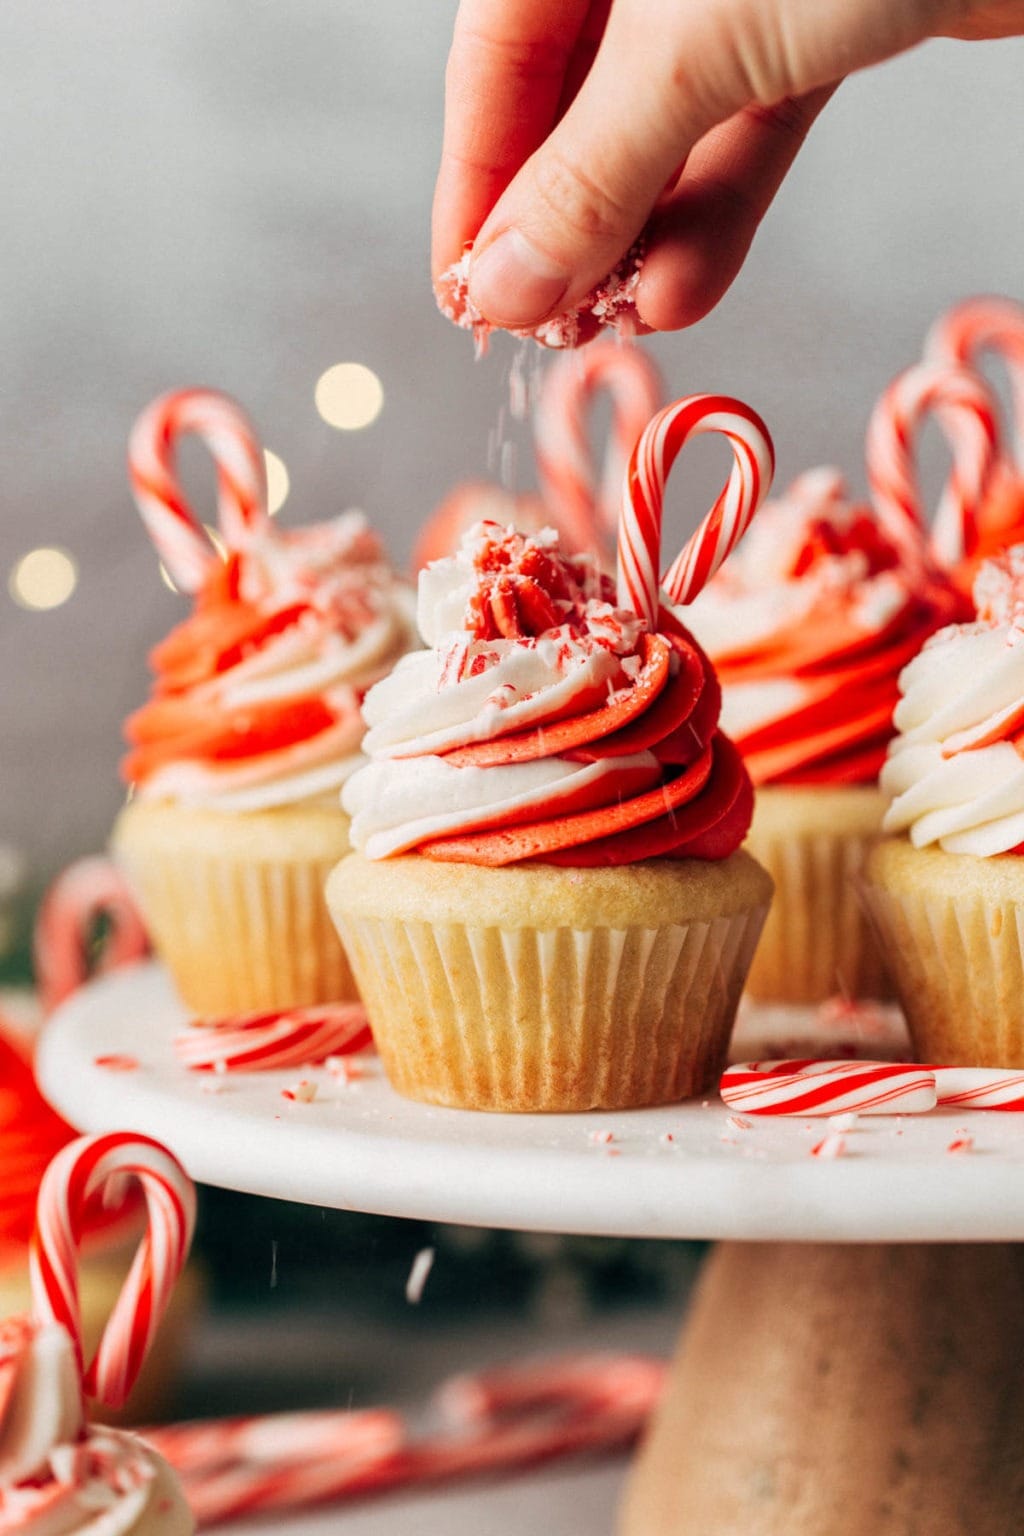 Cupcakes topped with red and white frosting and decorated with sugar cane candies.